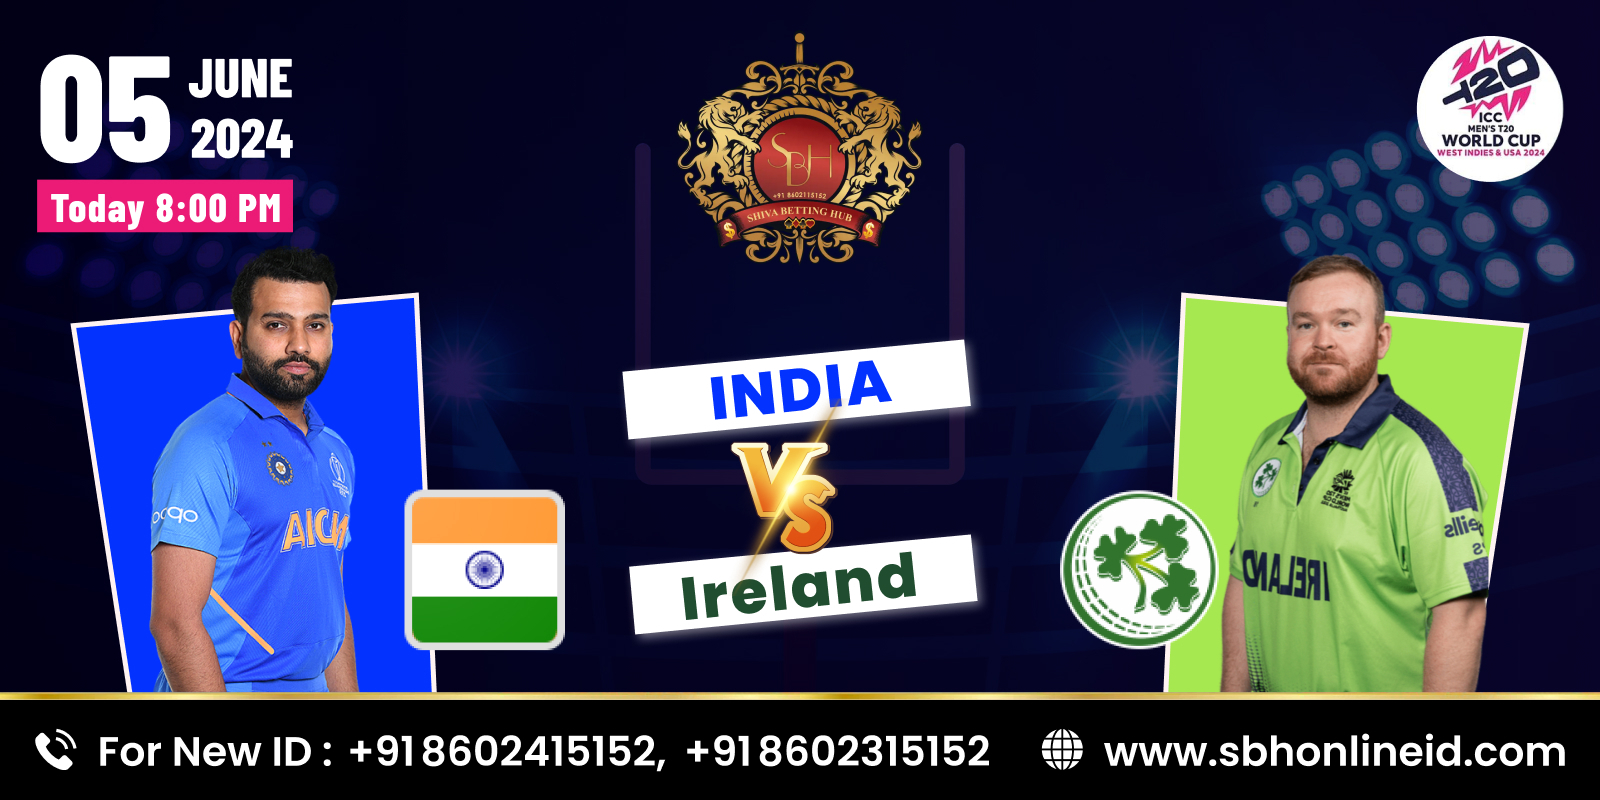 India vs Ireland: Today’s Match Prediction and Information for the T20 World Cup